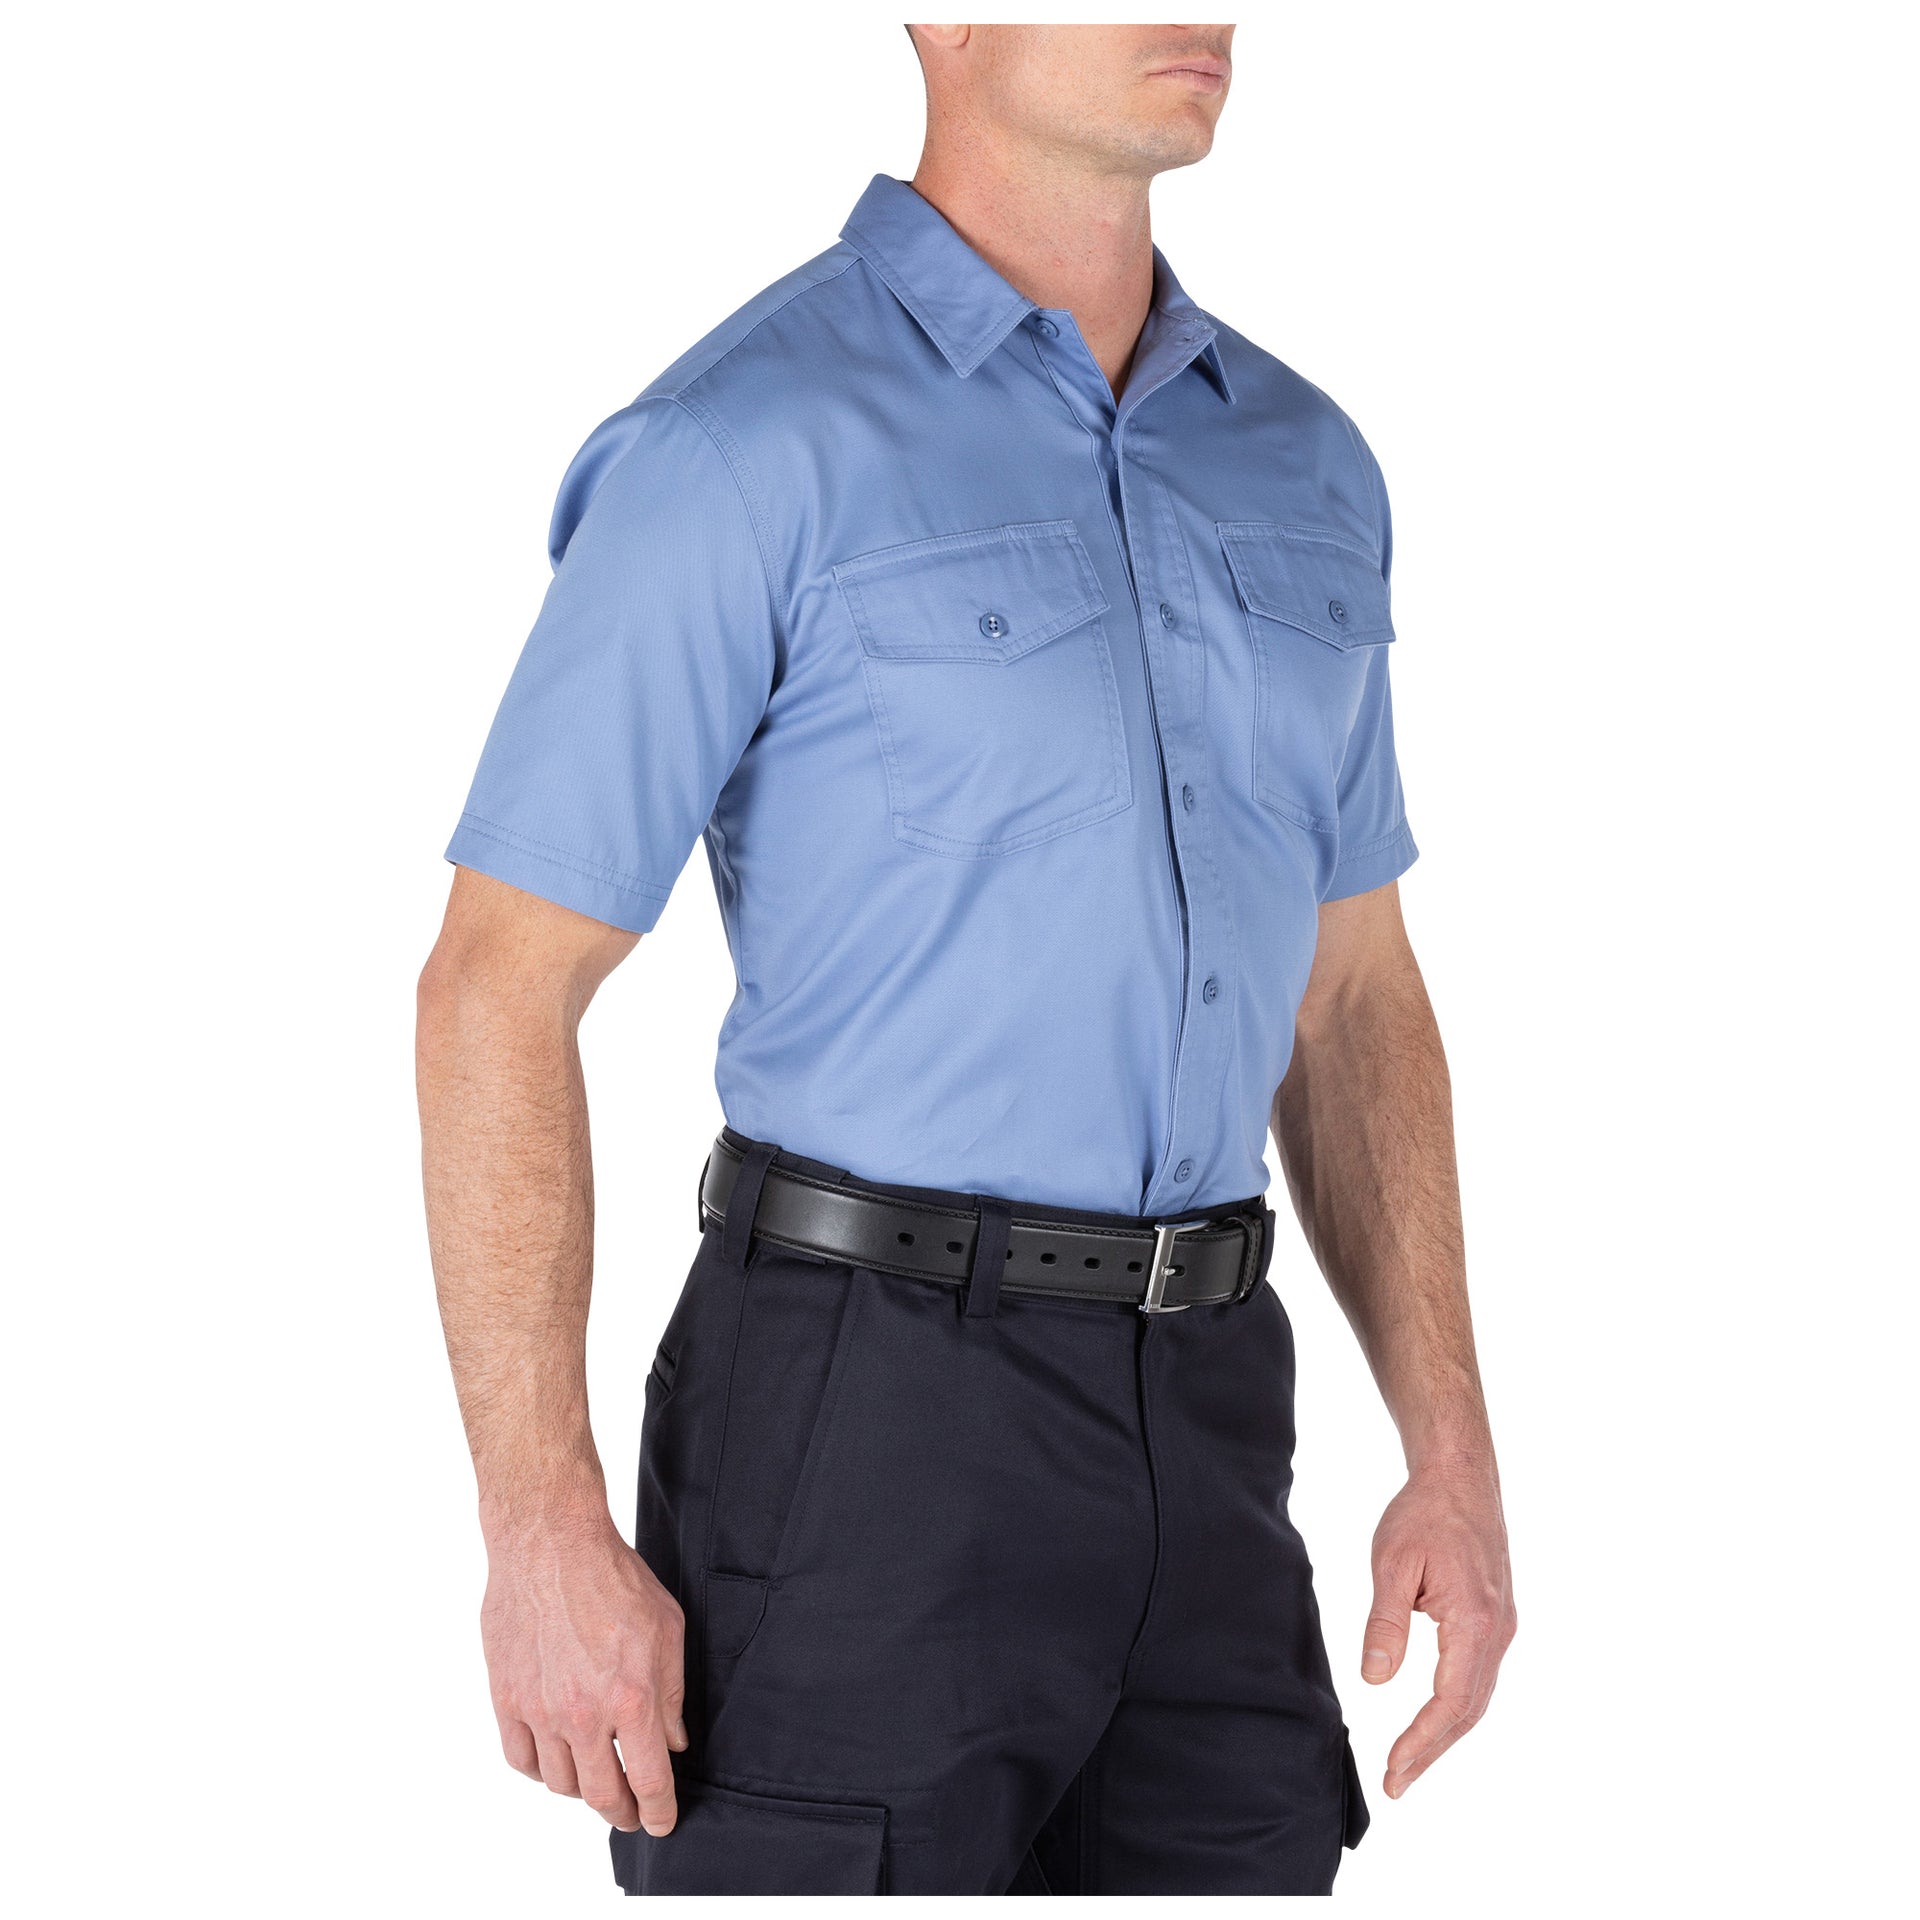 5.11 Tactical Company Short Sleeve Shirt (71391) | The Fire Center | Fuego Fire Center | Firefighter Gear |  Ready to answer every call through a busy shift, Short Sleeve Shirt backs you with a vital layer of safety (certified to NFPA 1975, 2019 edition) in a high-tech, low maintenance fabric. It’s made with a soft, & durable cotton twill that’s wrinkle-resistant with protective Firefly™ thread